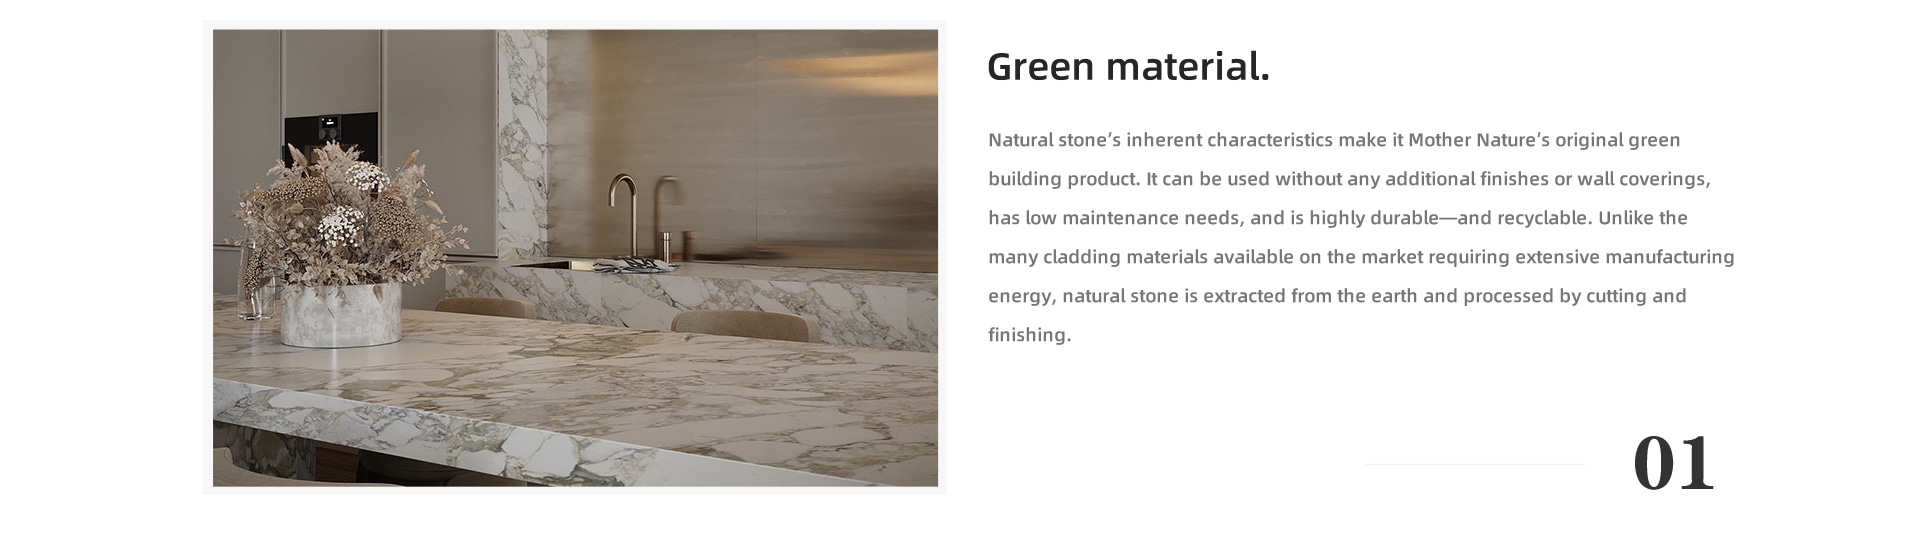 Green material Natural stone’s inherent characteristics make it Mother Nature’s original green building product. It can be used without any additional finishes or wall coverings, has low maintenance needs, and is highly durable—and recyclable. Unlike the many cladding materials available on the market requiring extensive manufacturing energy, natural stone is extracted from the earth and processed by cutting and finishing.